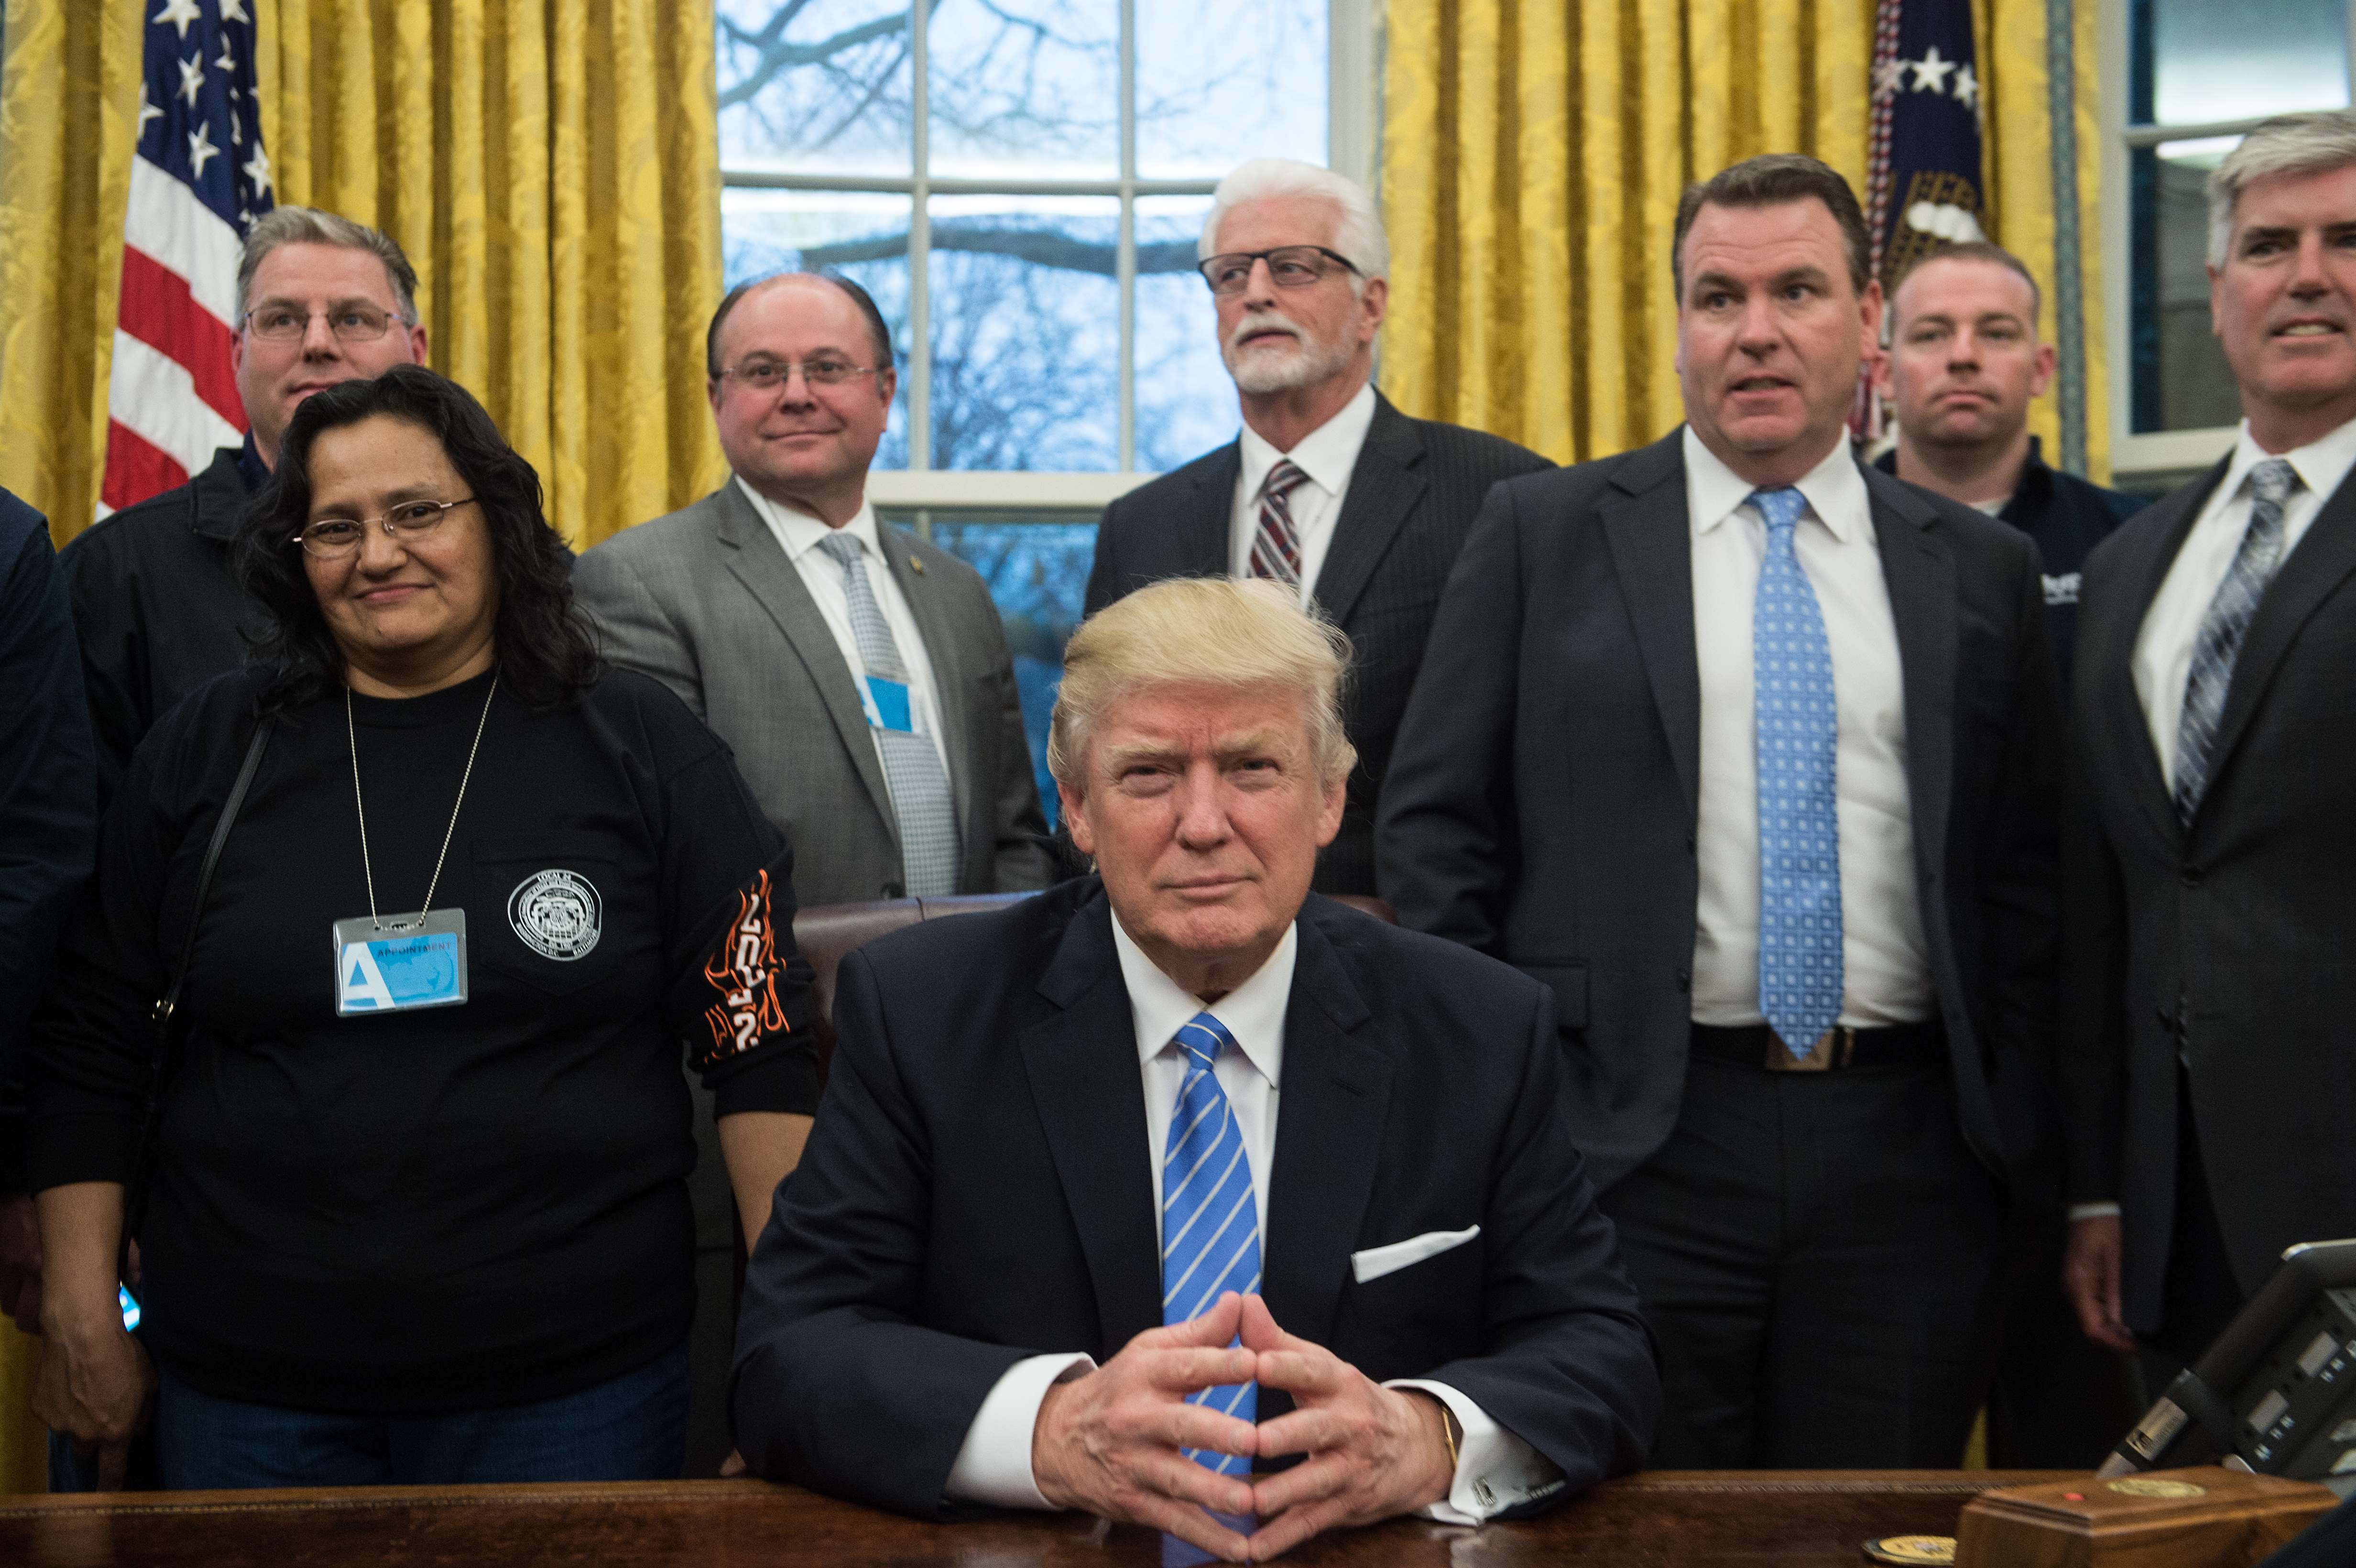 US President Donald Trump poses with labour leaders in the Oval Office at the White House. So here we are. Trump is president. He’s given the speech. Now comes the tricky bit. Photo: AFP